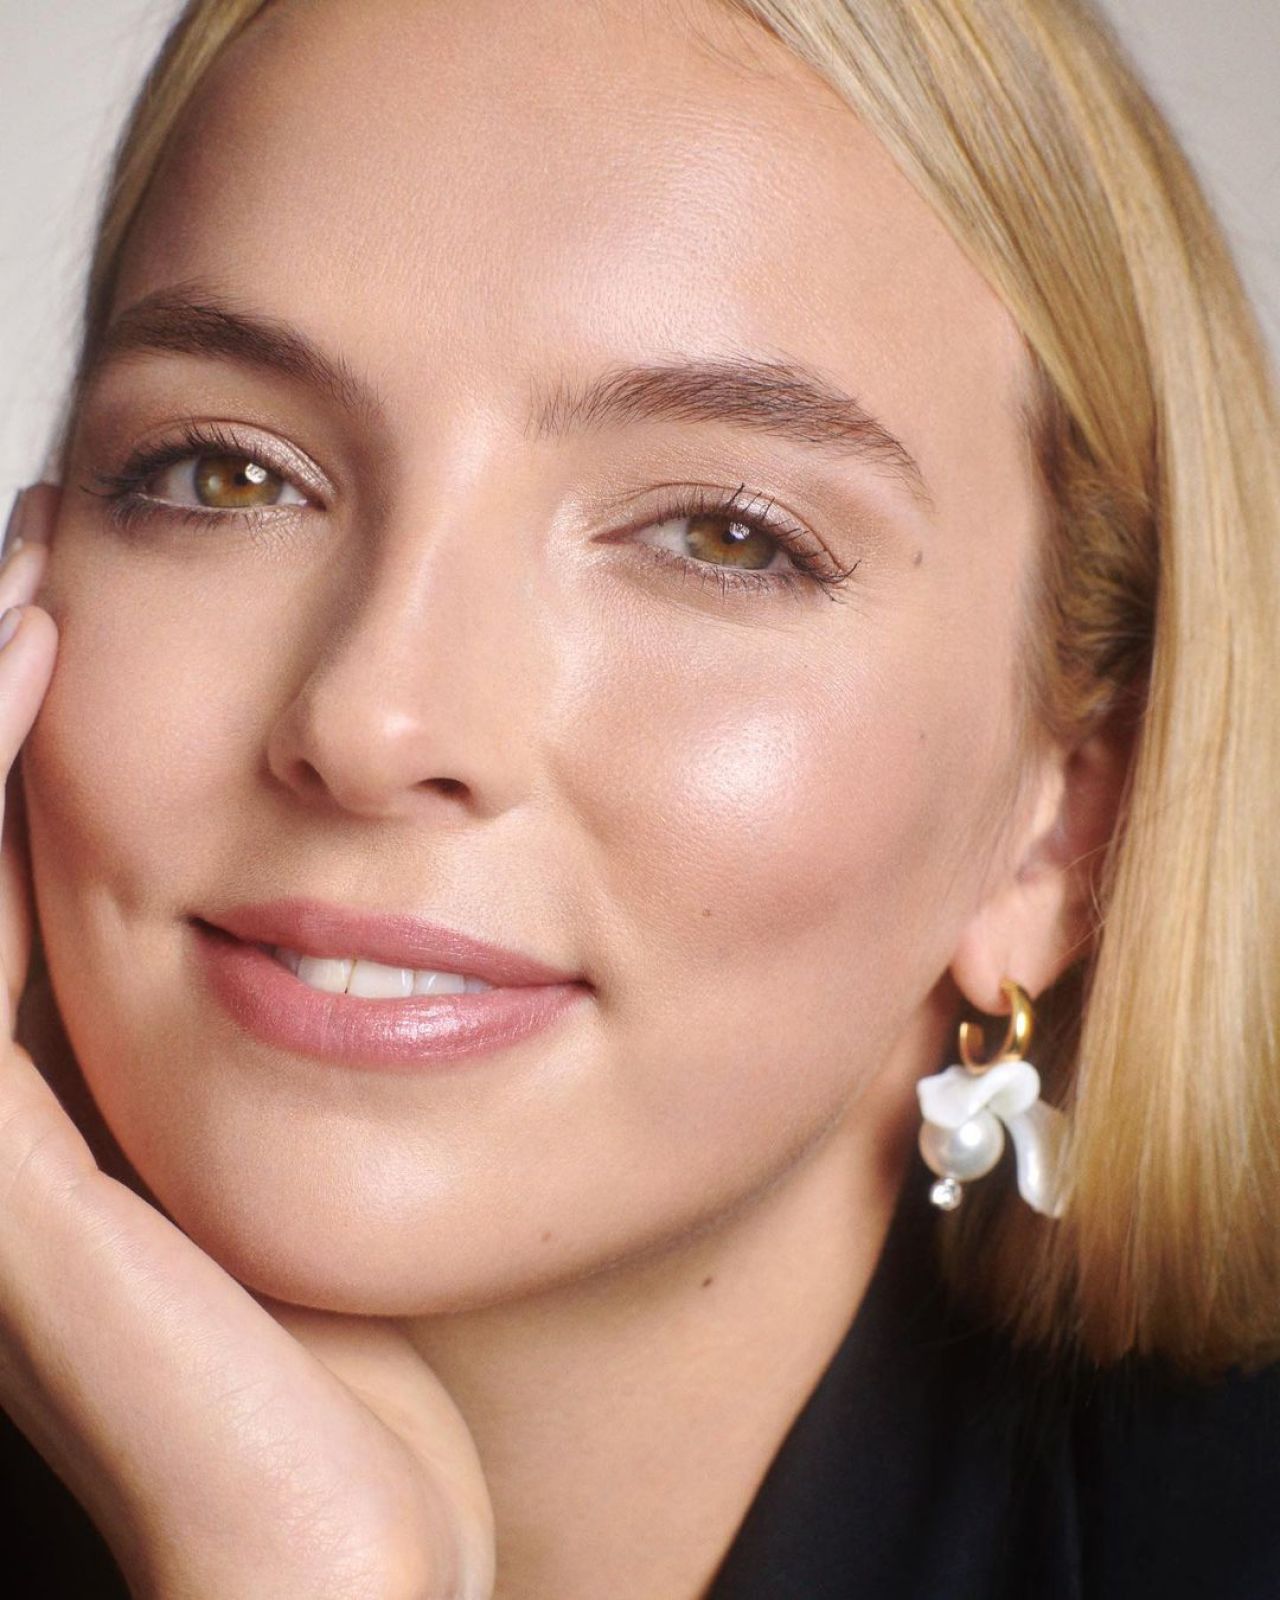 jodie-comer-the-new-face-of-skincare-brand-noble-panacea-2020-17.jpg